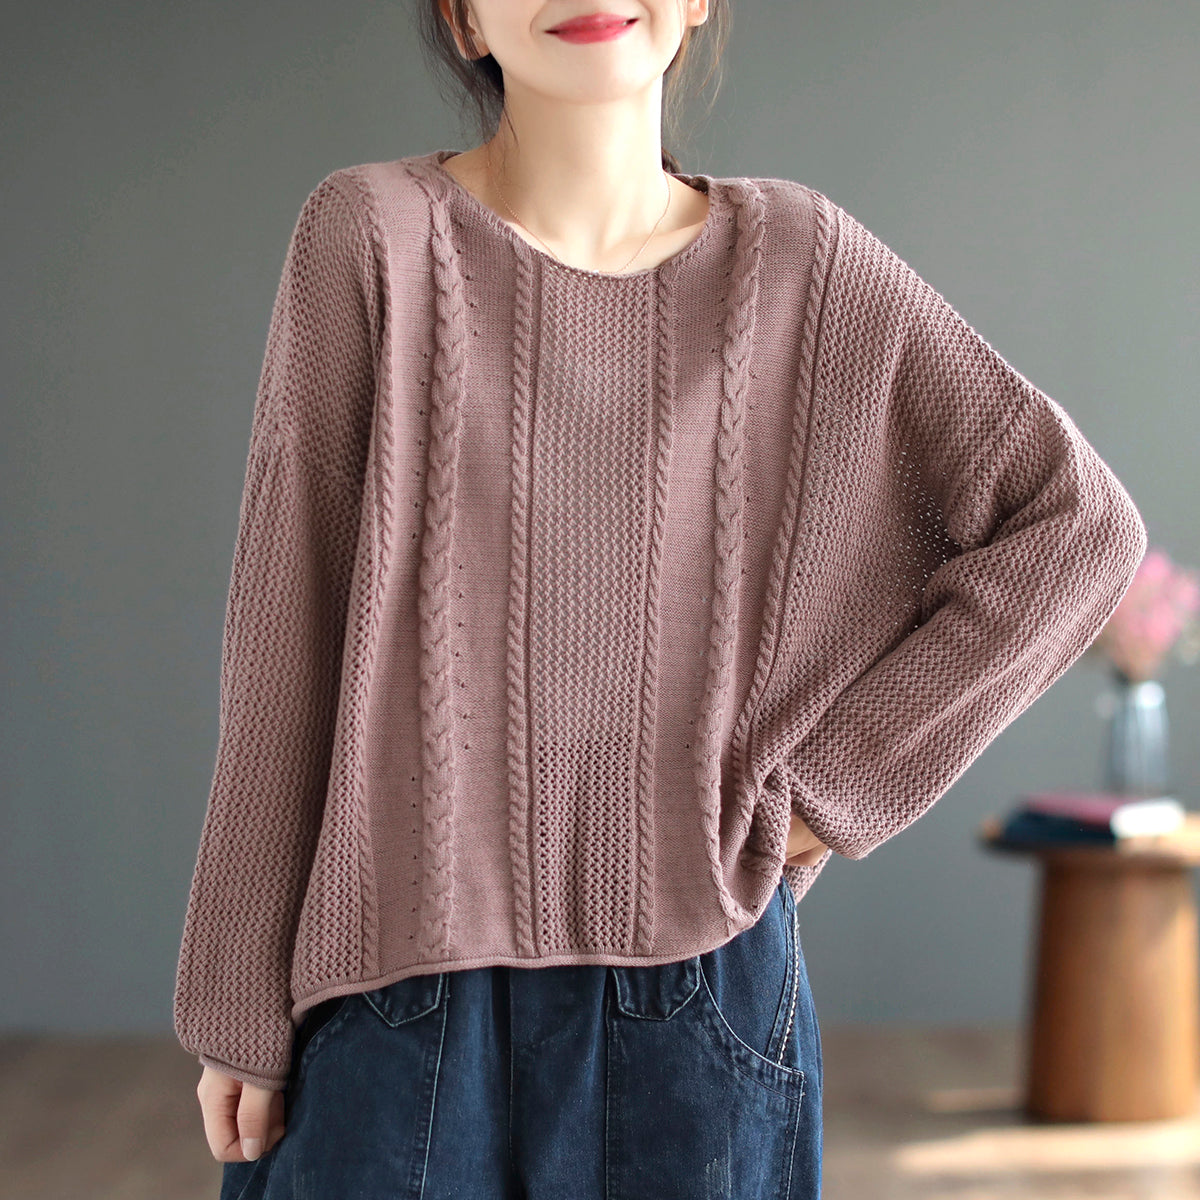 Women Retro Loose Cotton Knitted Sweater Plus Size Aug 2022 New Arrival One Size Pink 